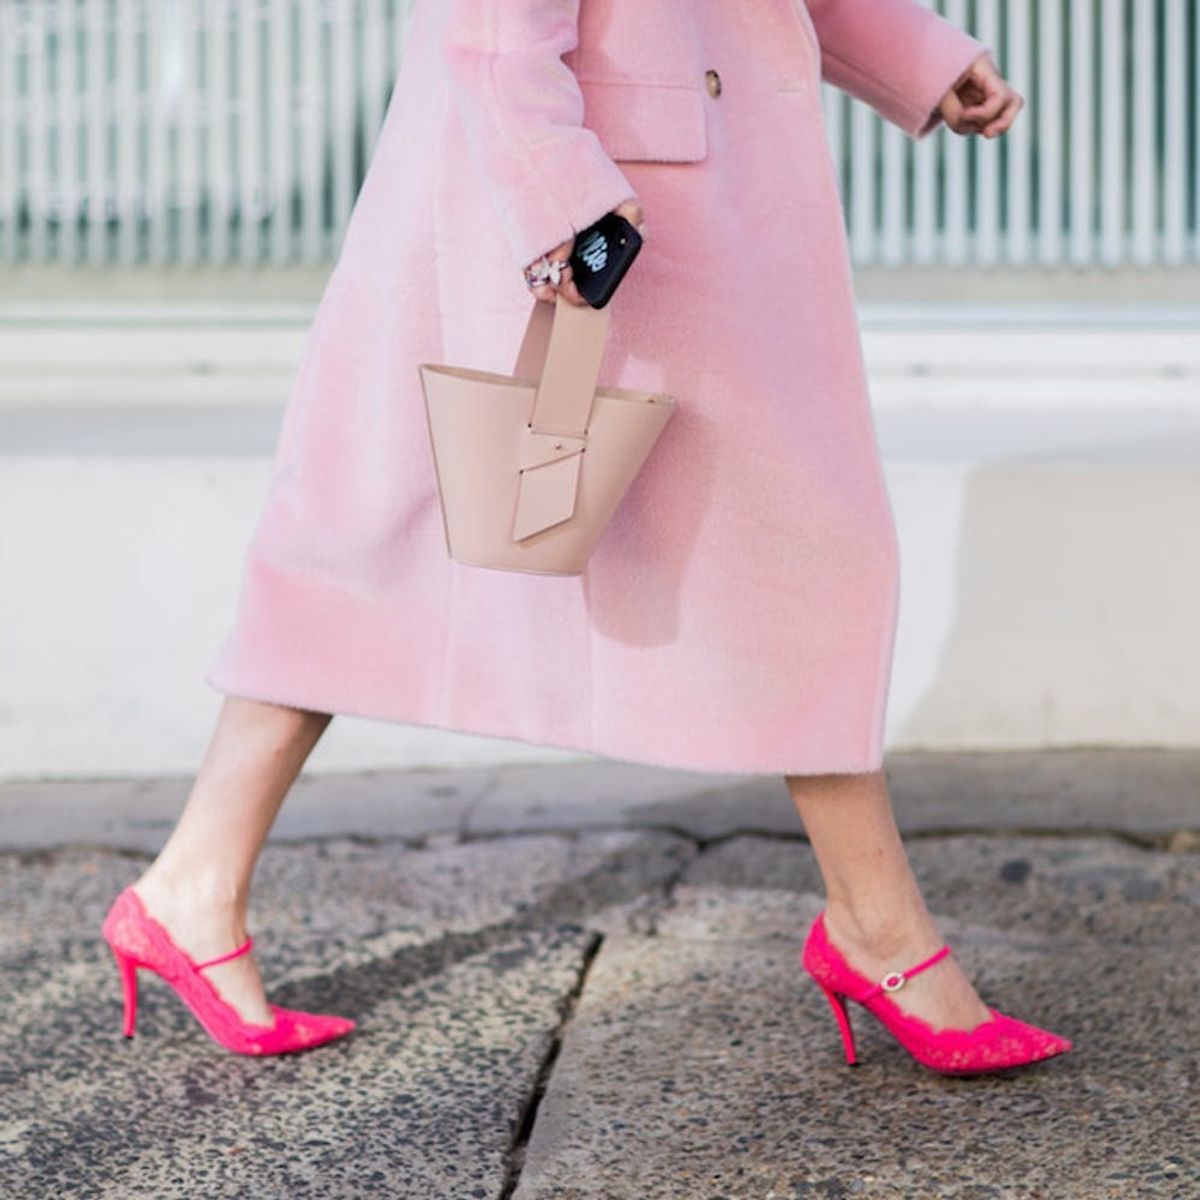 Do You Own More Shoes Than the Average Woman? - Brit + Co